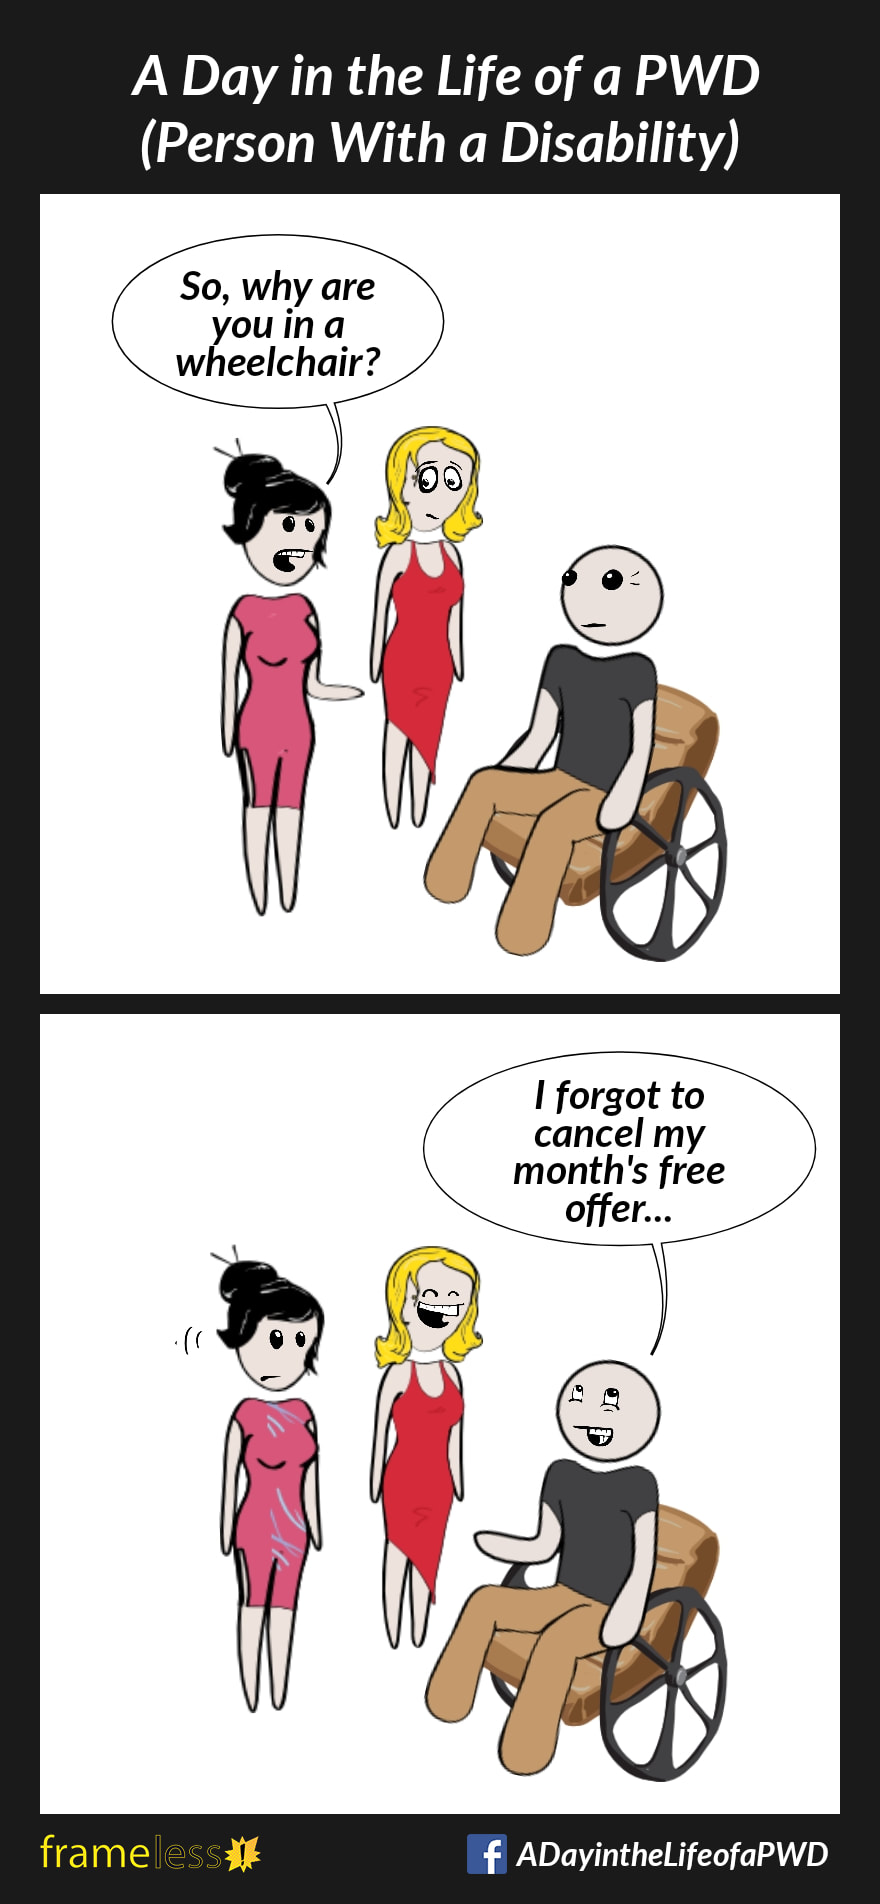 COMIC STRIP 
A Day in the Life of a PWD (Person With a Disability) 

Frame 1:
A man in a wheelchair is talking to a woman and her friend.
WOMAN: So, why are you in a wheelchair?

Frame 2:
MAN: I forgot to cancel my month's free offer...
The friend laughs.